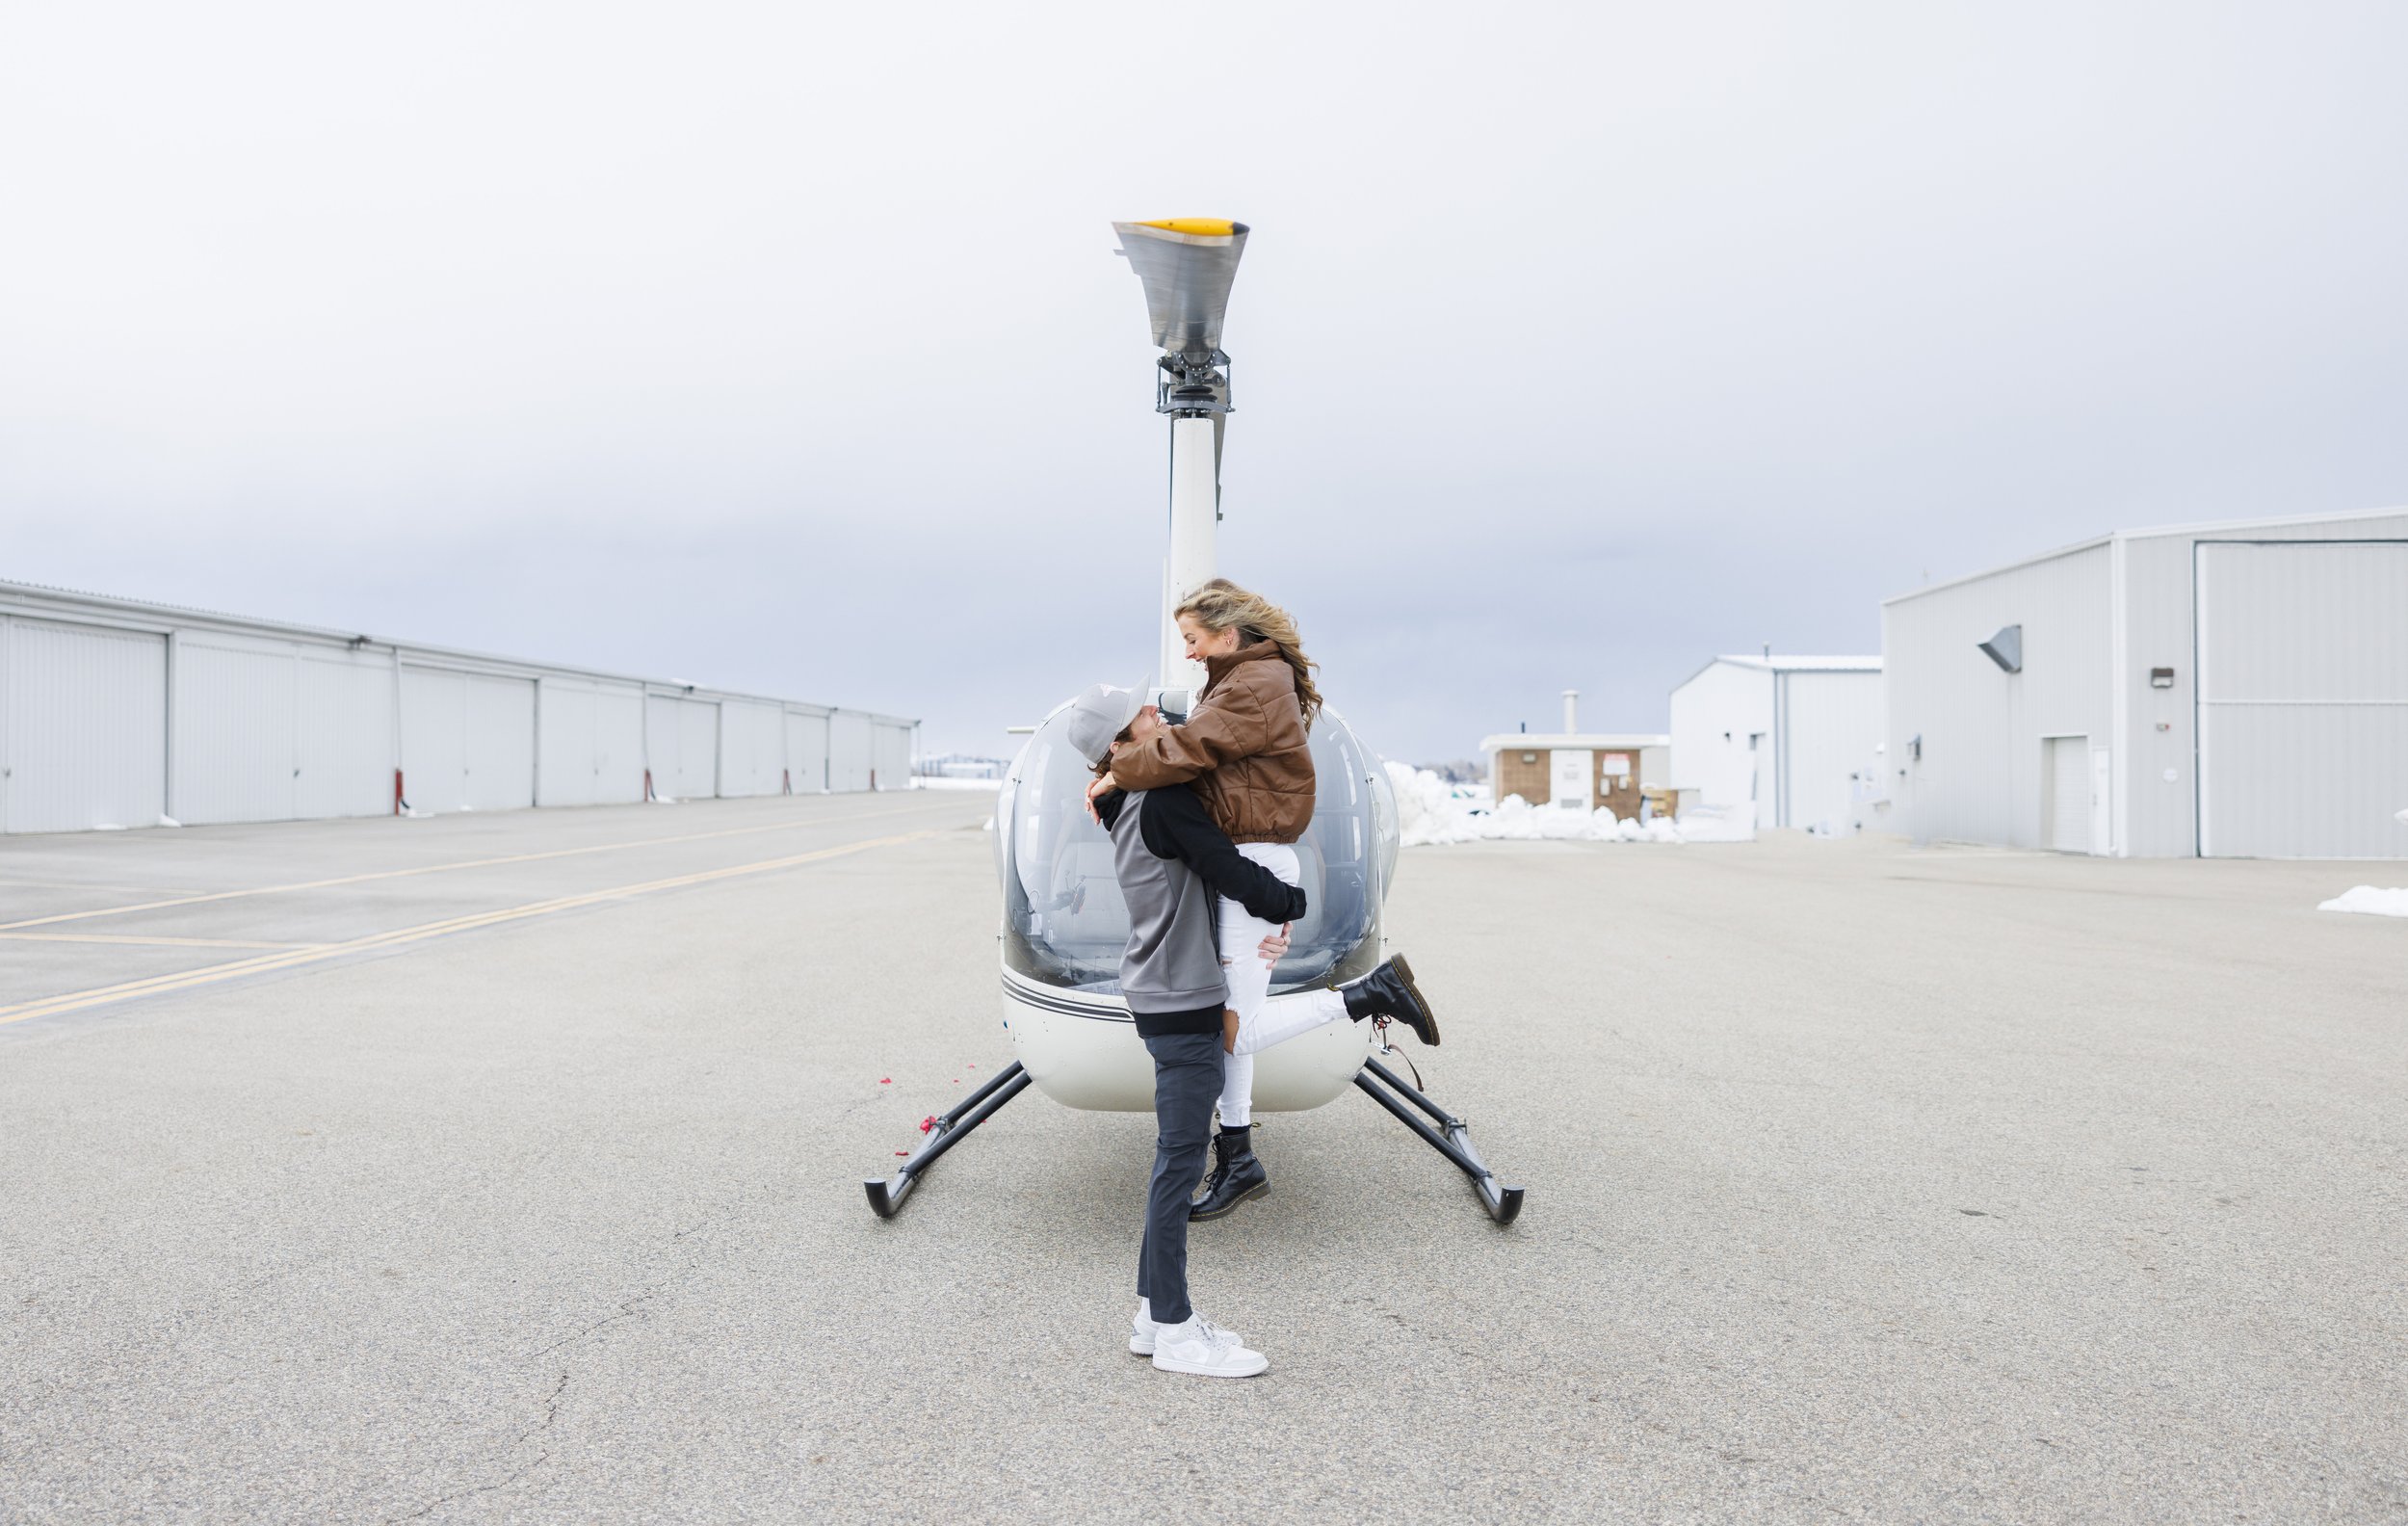  A man lifts his girlfriend up in front of a helicopter for engagements by Savanna Richardson Photography. newly engaged fun engagement locations #SavannaRichardsonPhotography #SavannaRichardsonEngagements #utahproposals #helicopterproposal #Utahenga